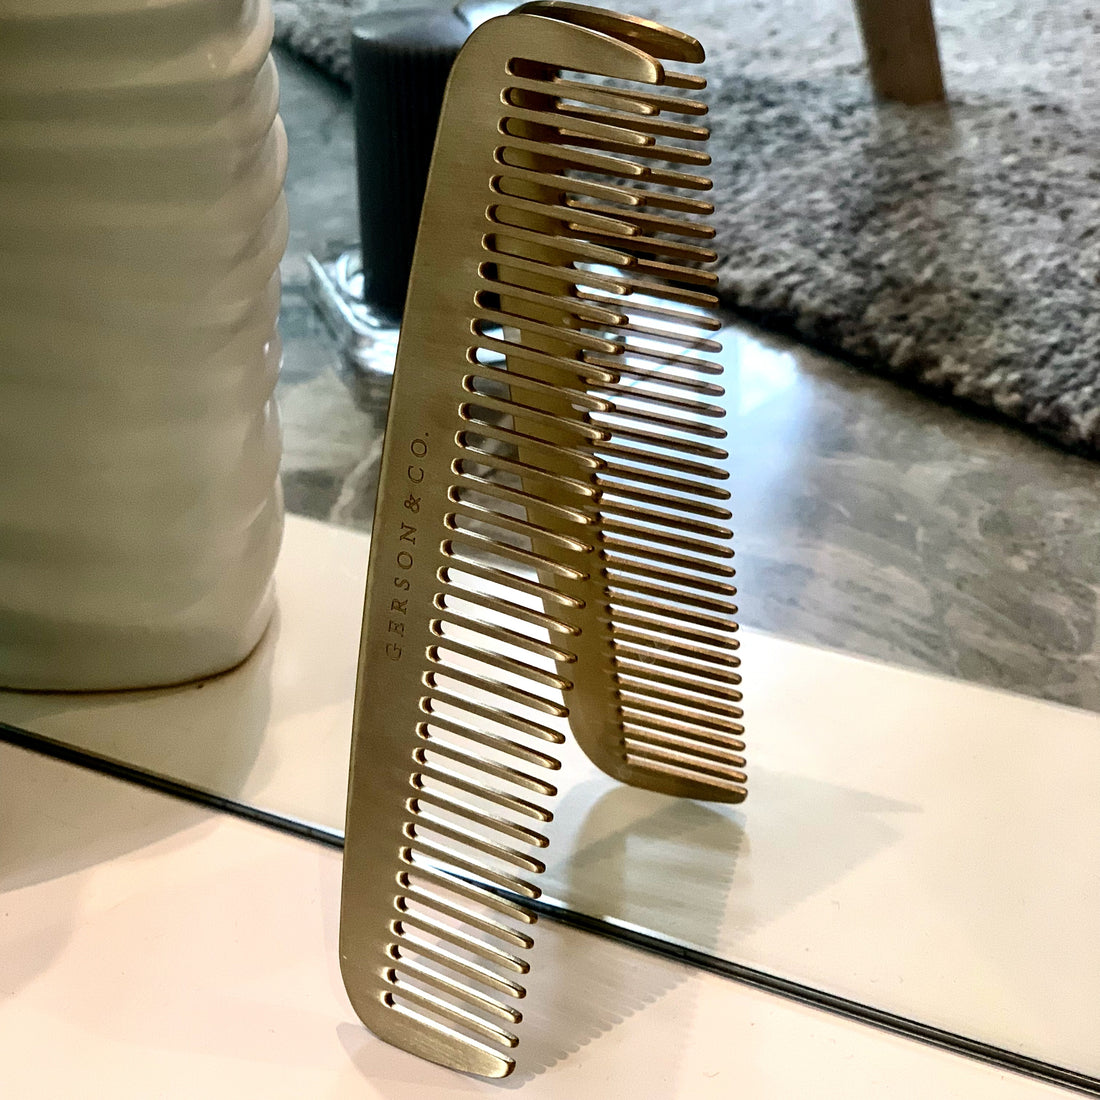 Introducing Our Signature Comb